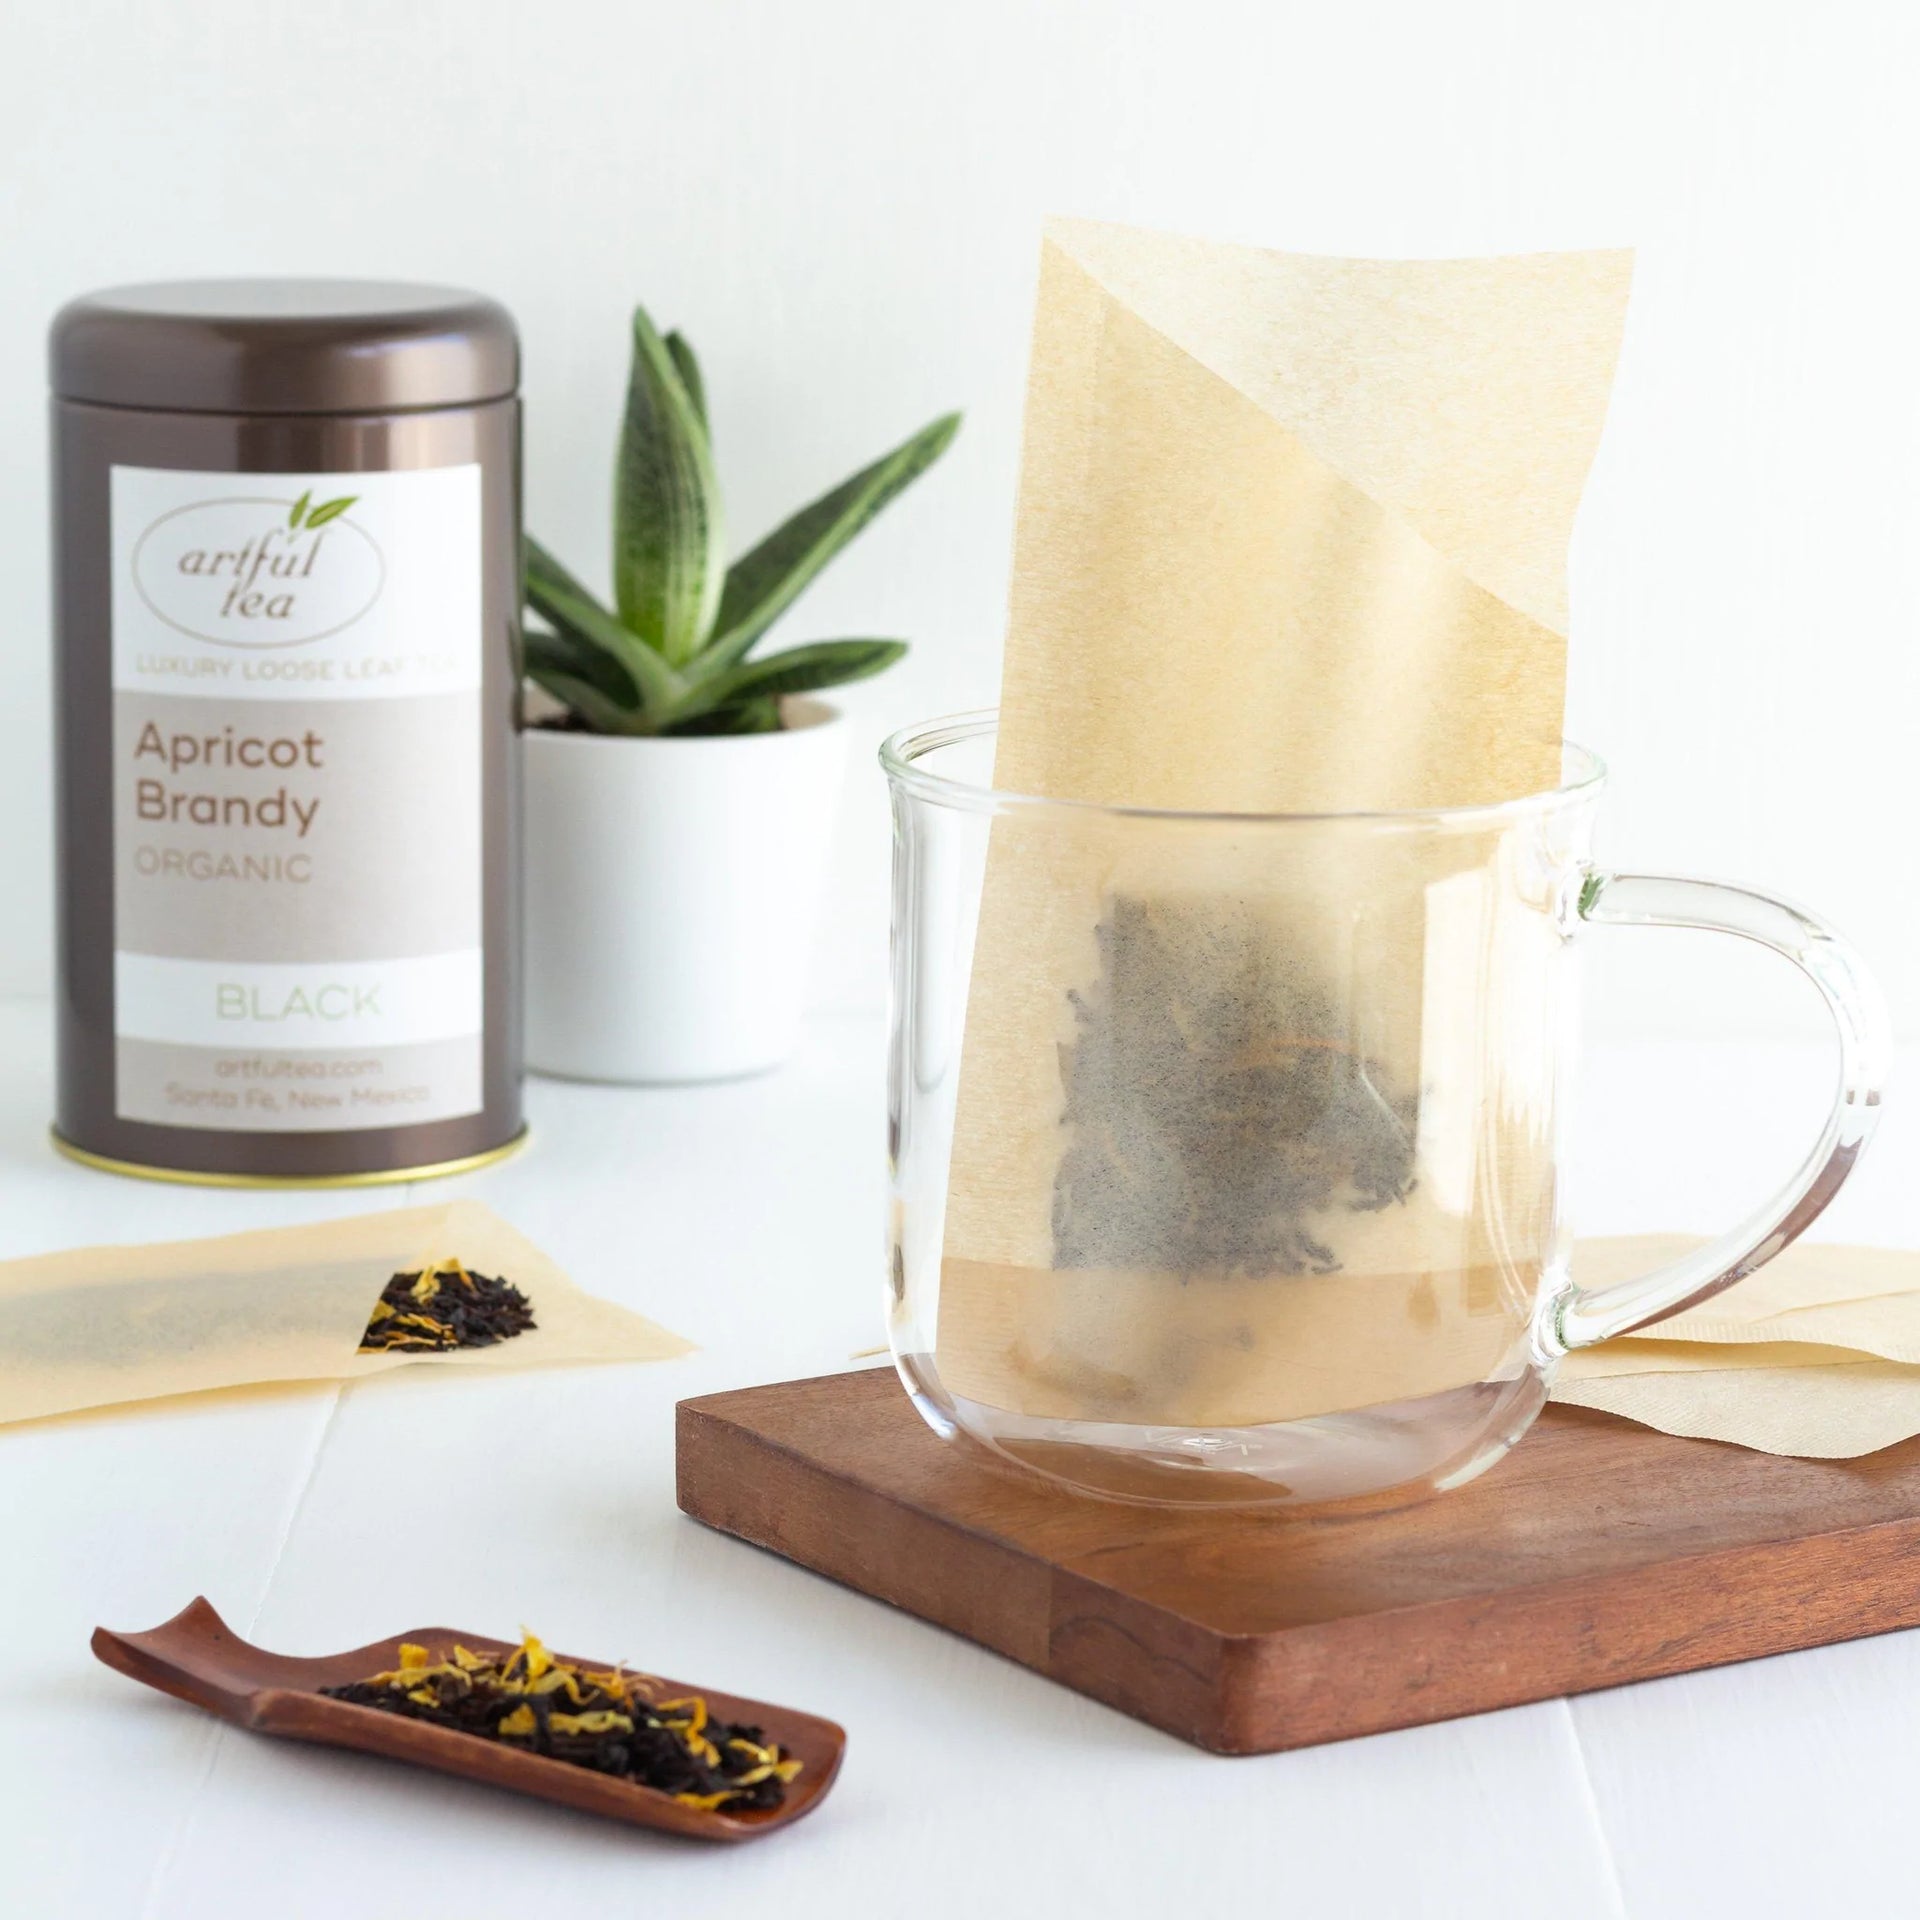 A self-filtering mug that takes care of the tea-bag while you sip